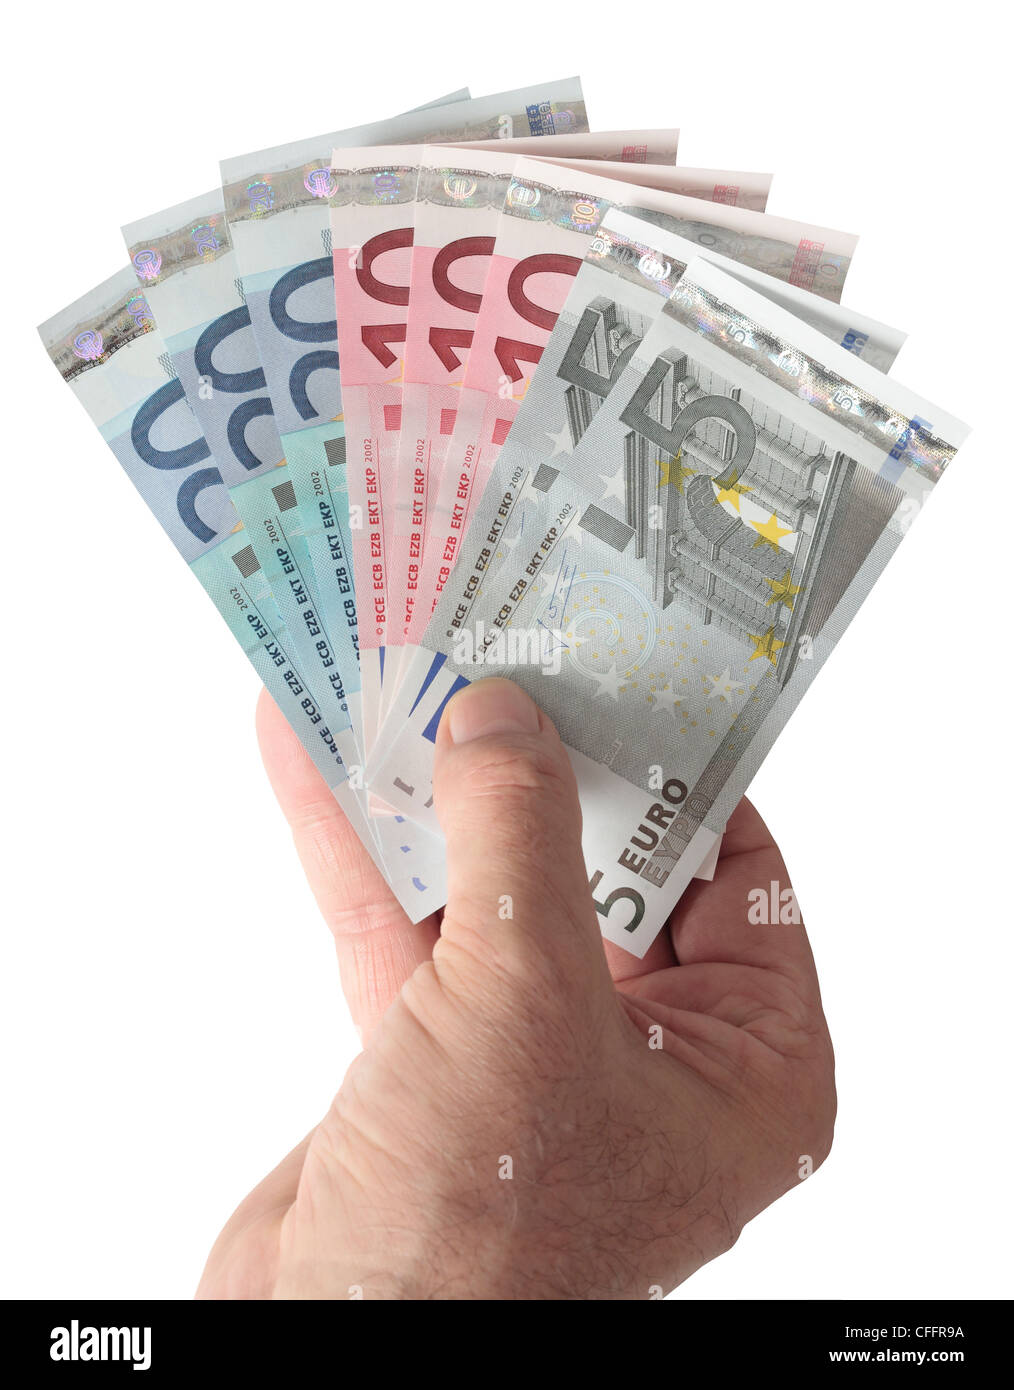 Handful of Euro banknotes with a total of 100 Euros. Stock Photo